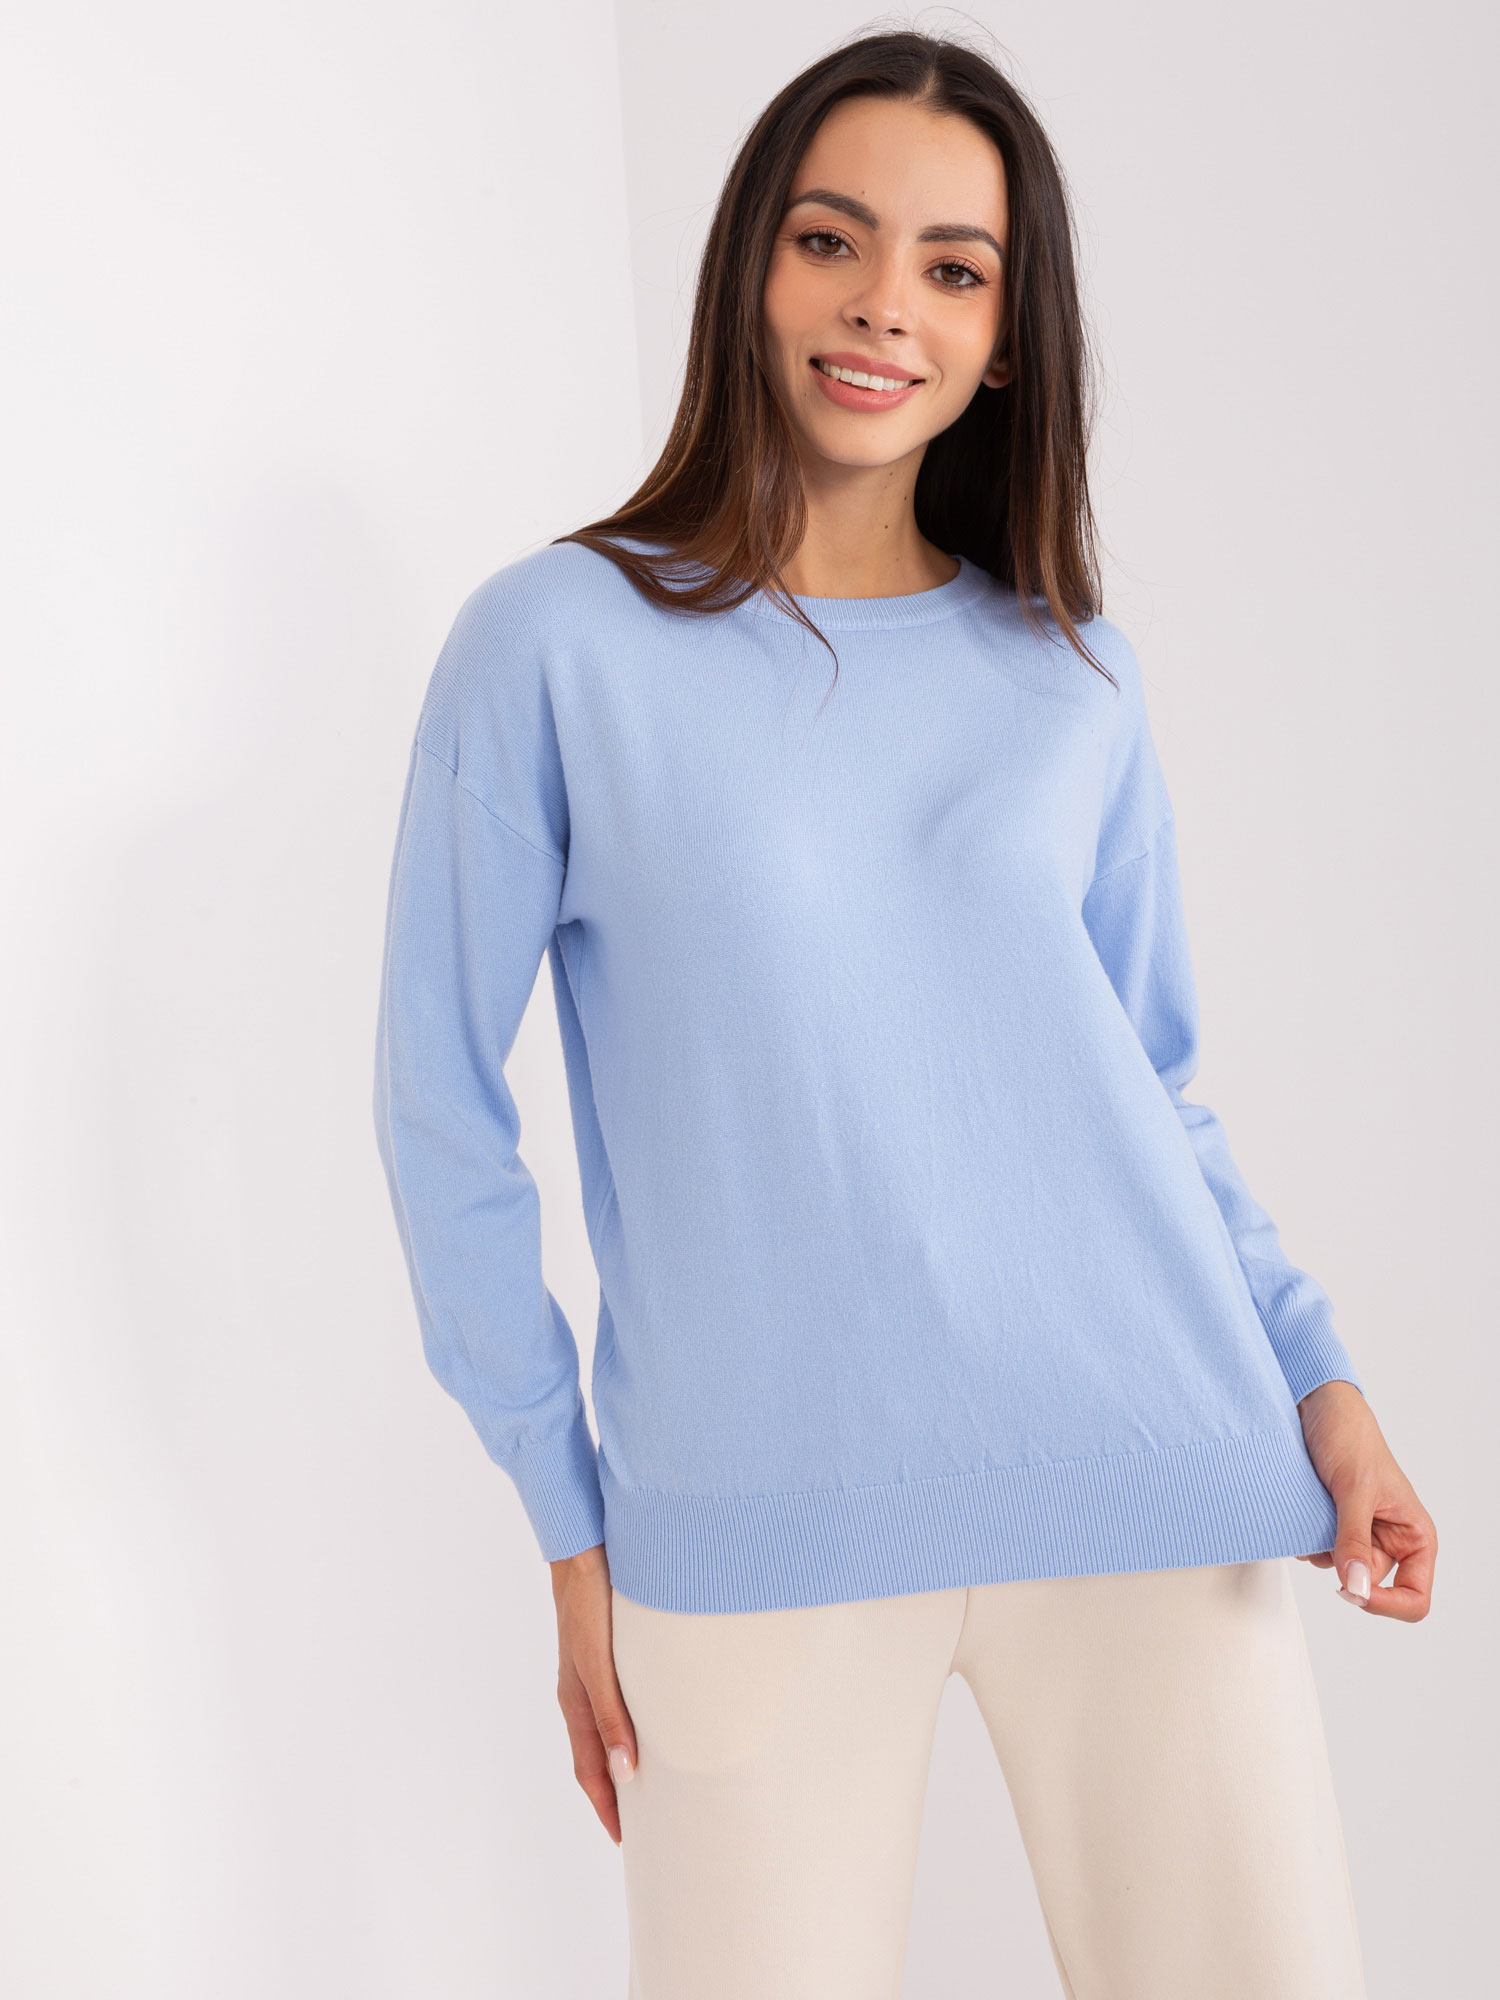 Light blue classic sweater with cuffs